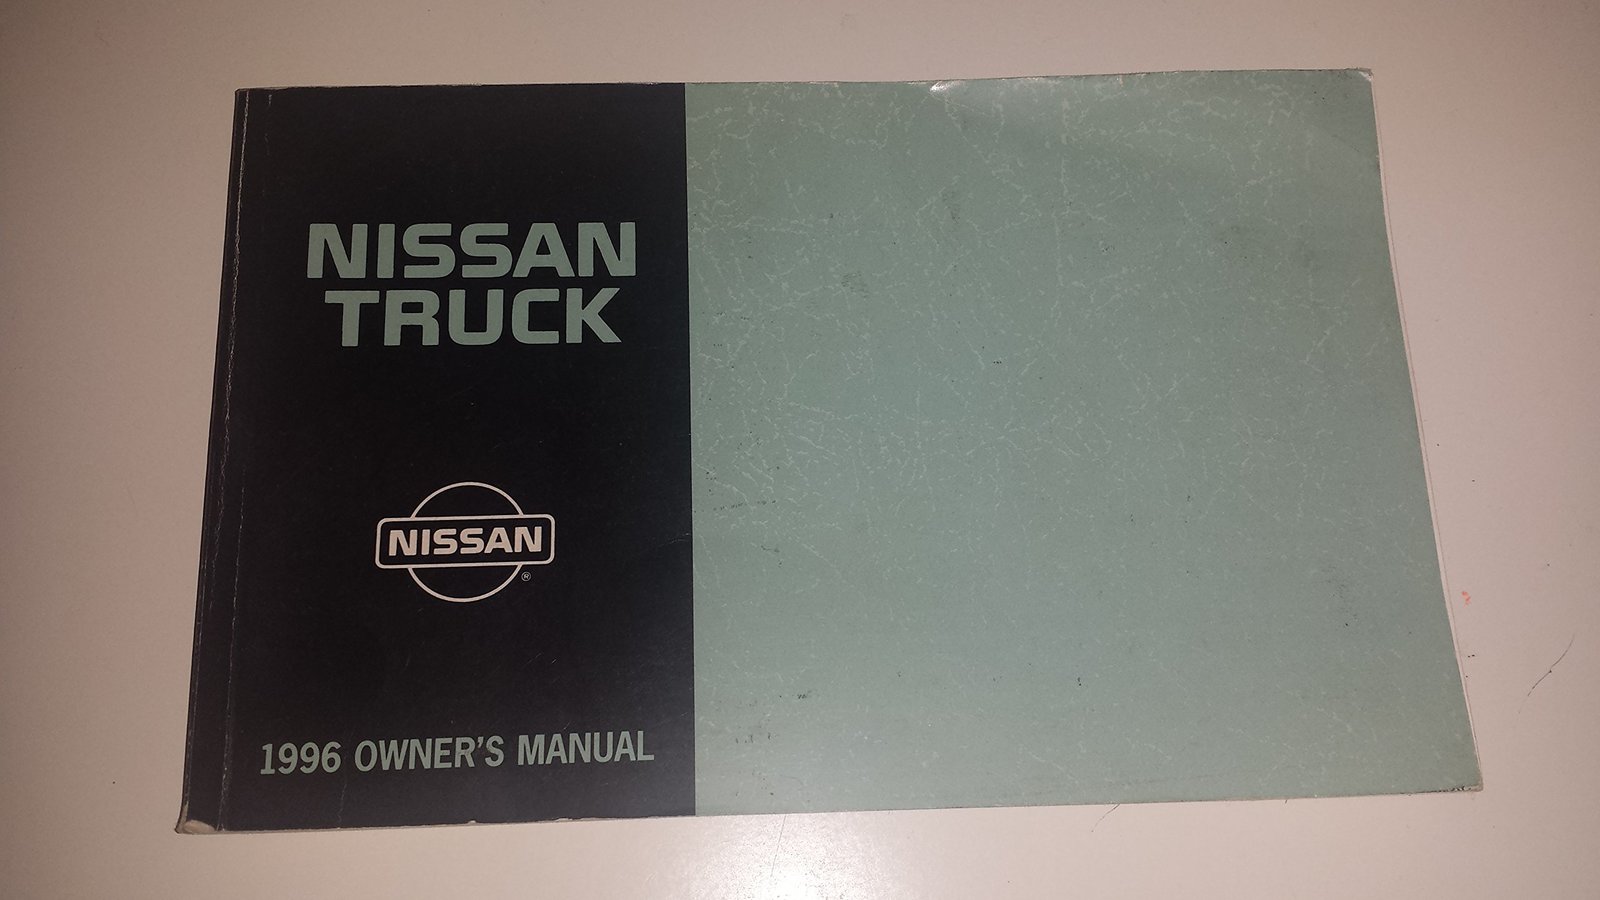 Primary image for 1996 Nissan 200SX Owner's Manual Original [Paperback] Nissan